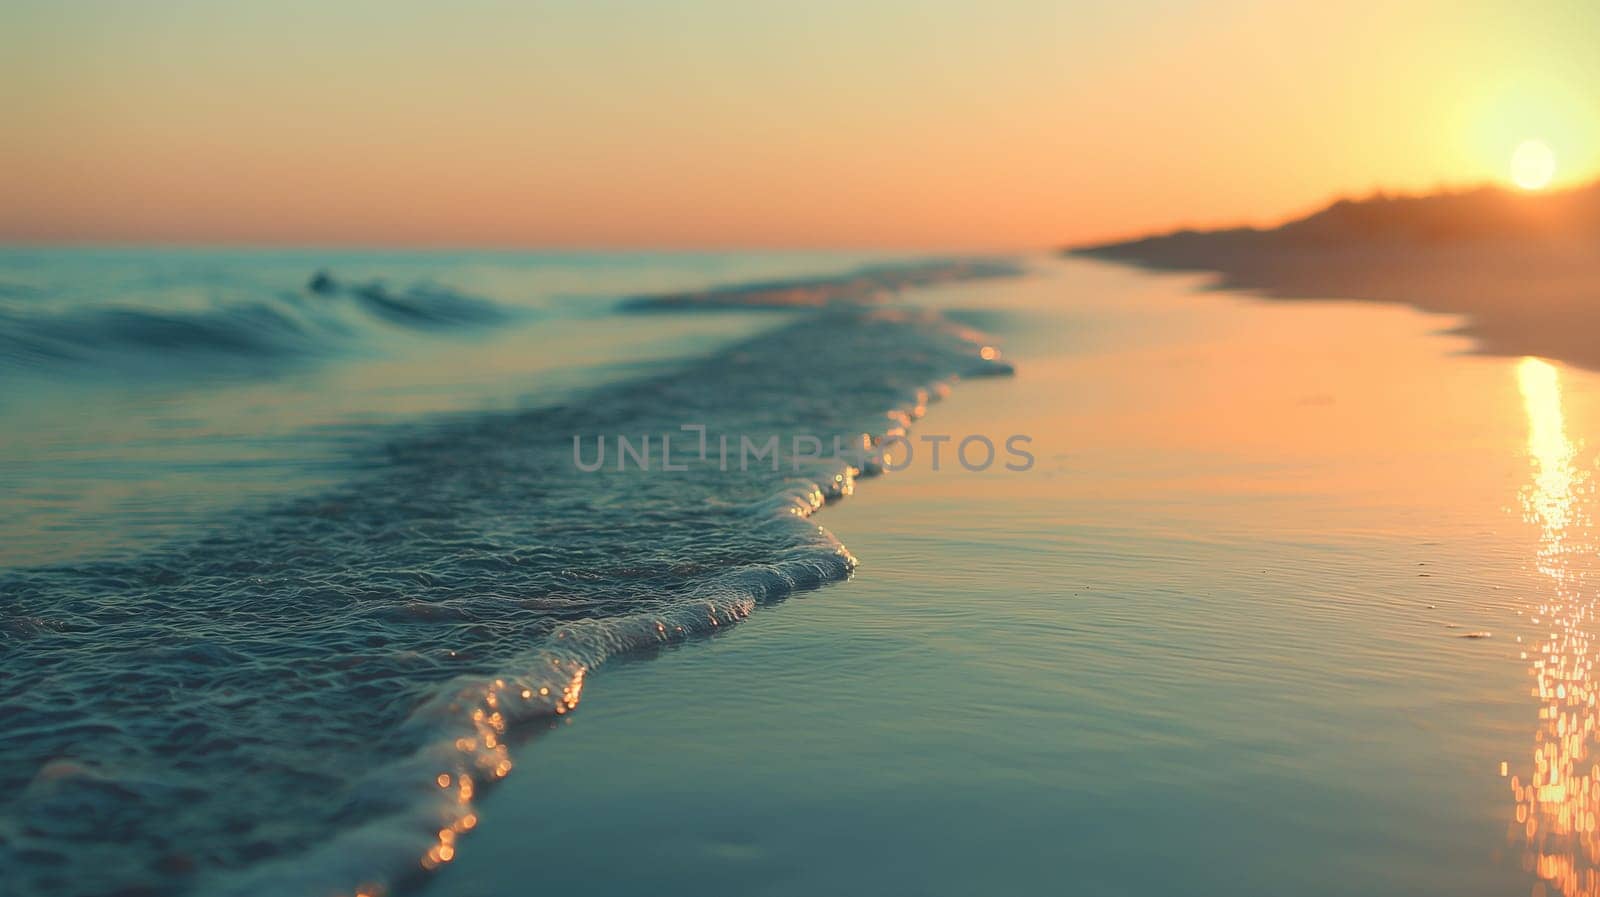 The ocean is calm and the sun is setting, creating a serene and peaceful atmosphere. The water is a deep blue color, and the sand is white. The beach is empty, with no people in sight - Generative AI